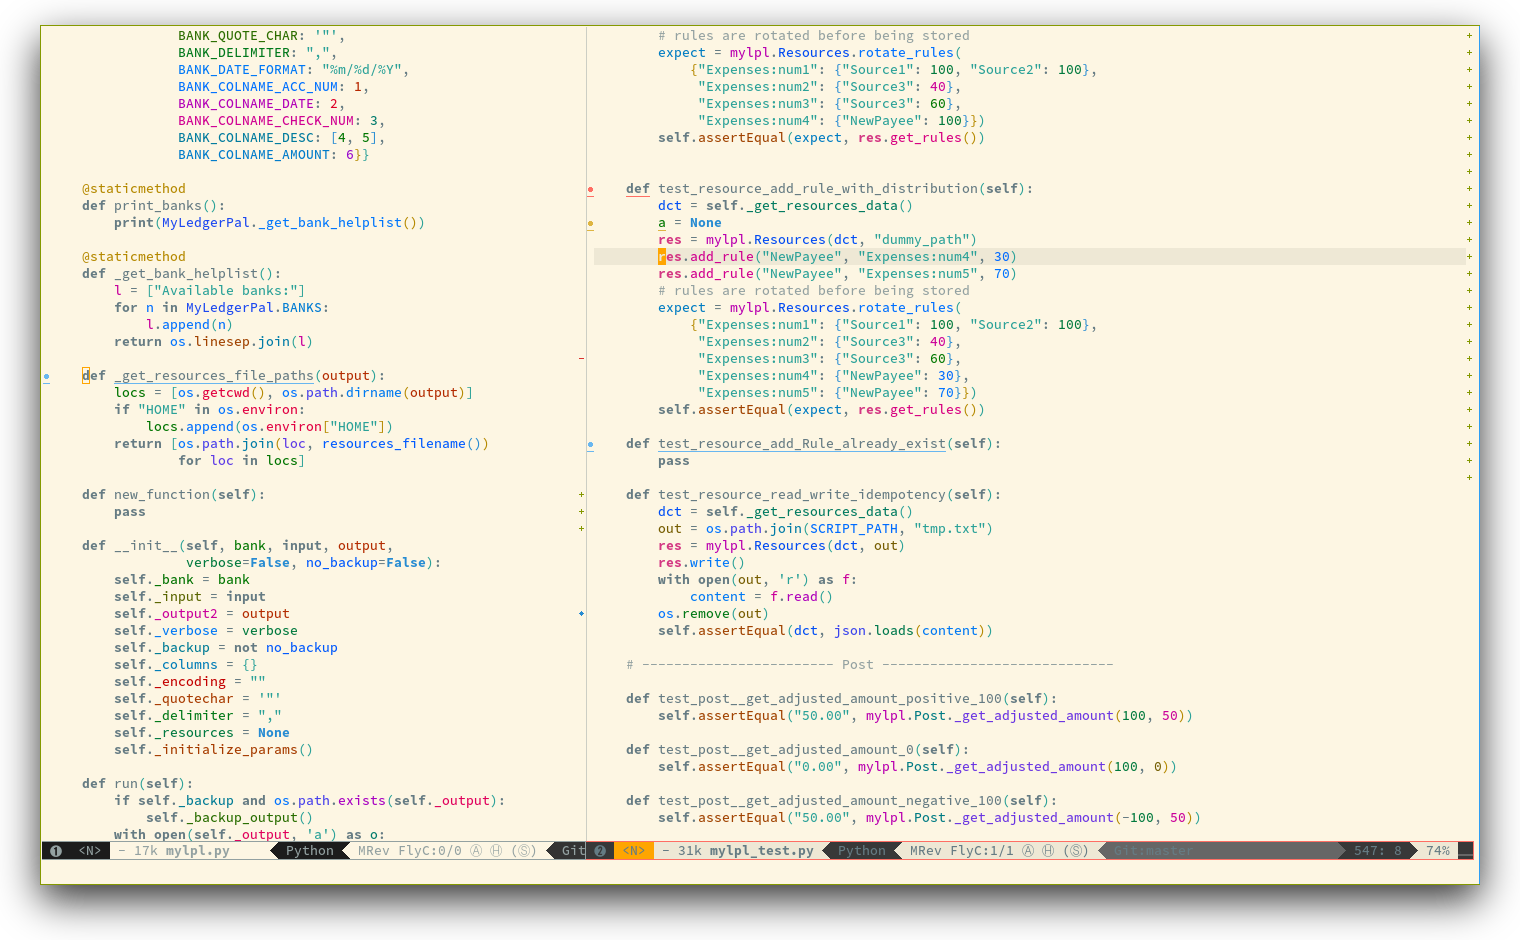 /TakeV/spacemacs/media/commit/0dce7a648de2423f18456e31482f6eaaef1d1eb2/layers/colors/img/theme-tweaks-python.png